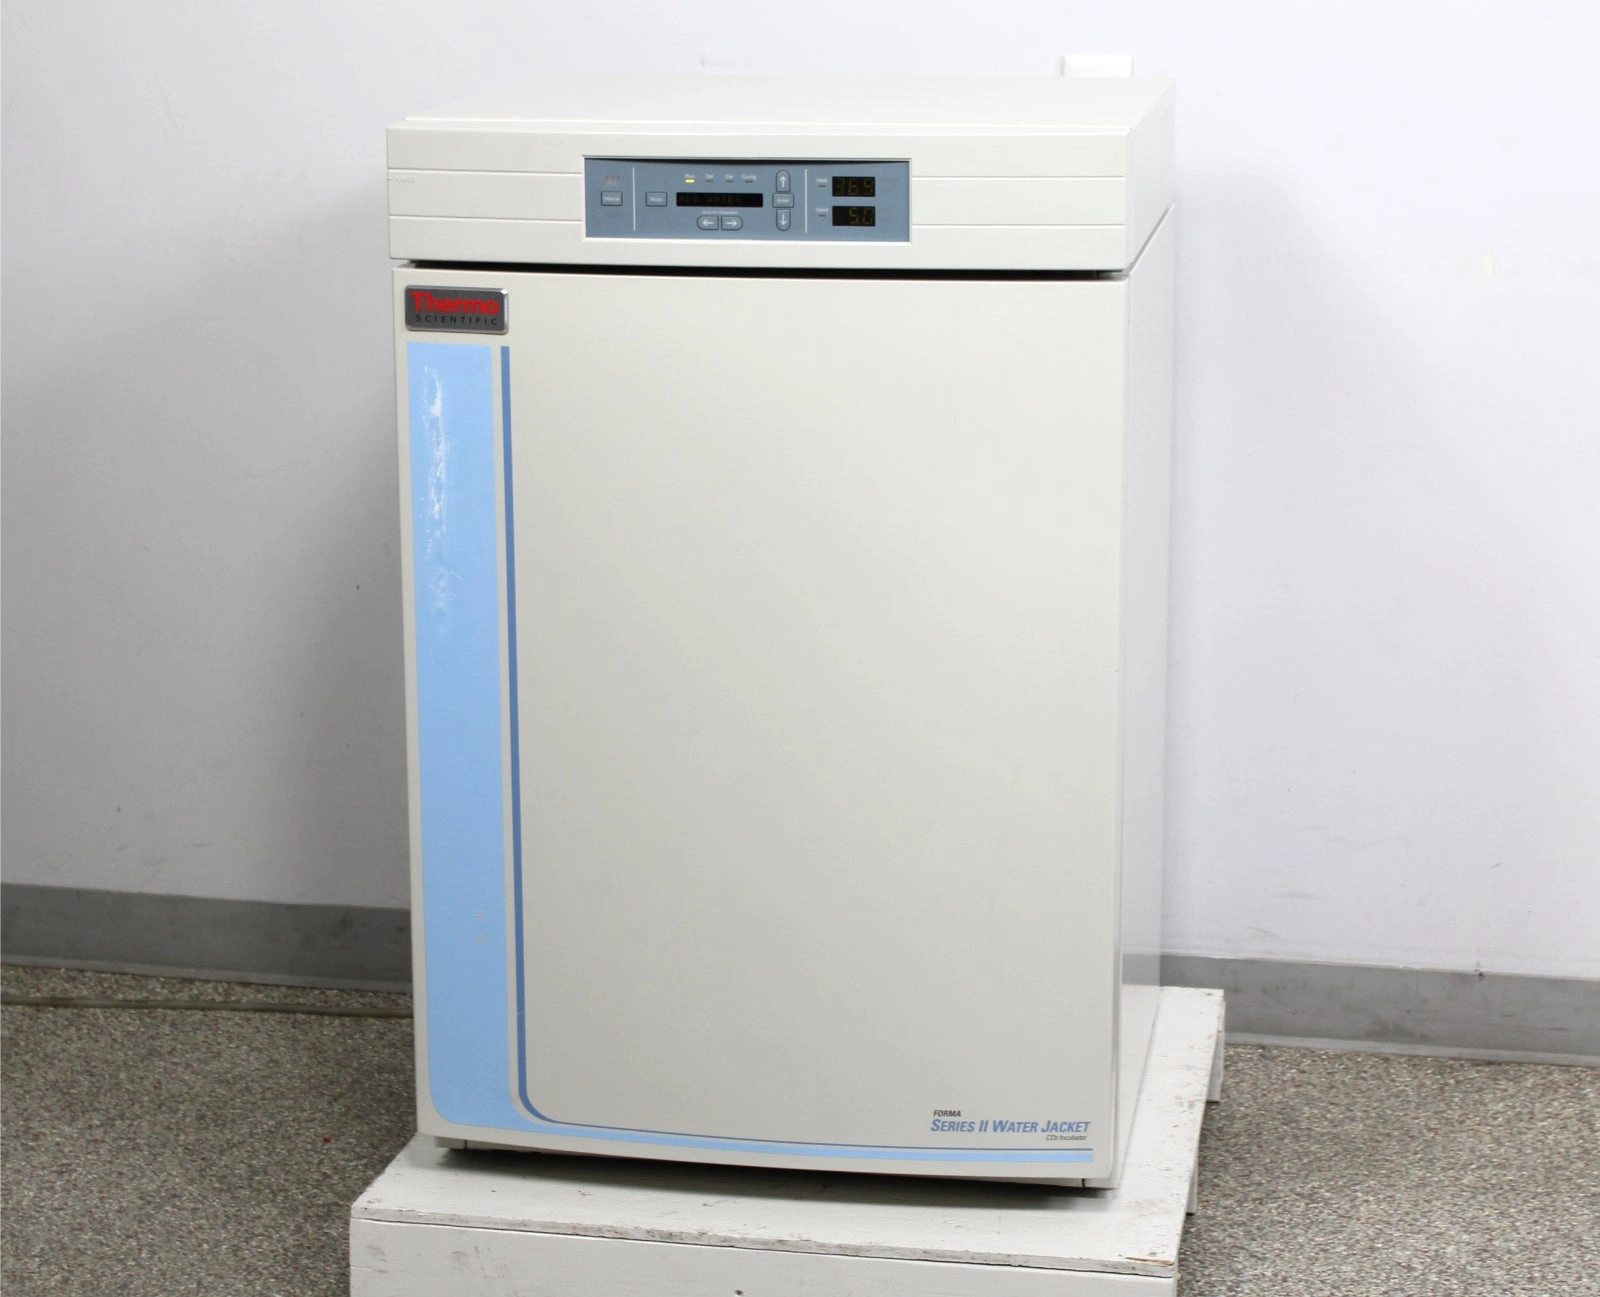 Thermo Scientific 3110 Forma Series II Water Jacketed CO2 Incubator &amp; 4 Shelves